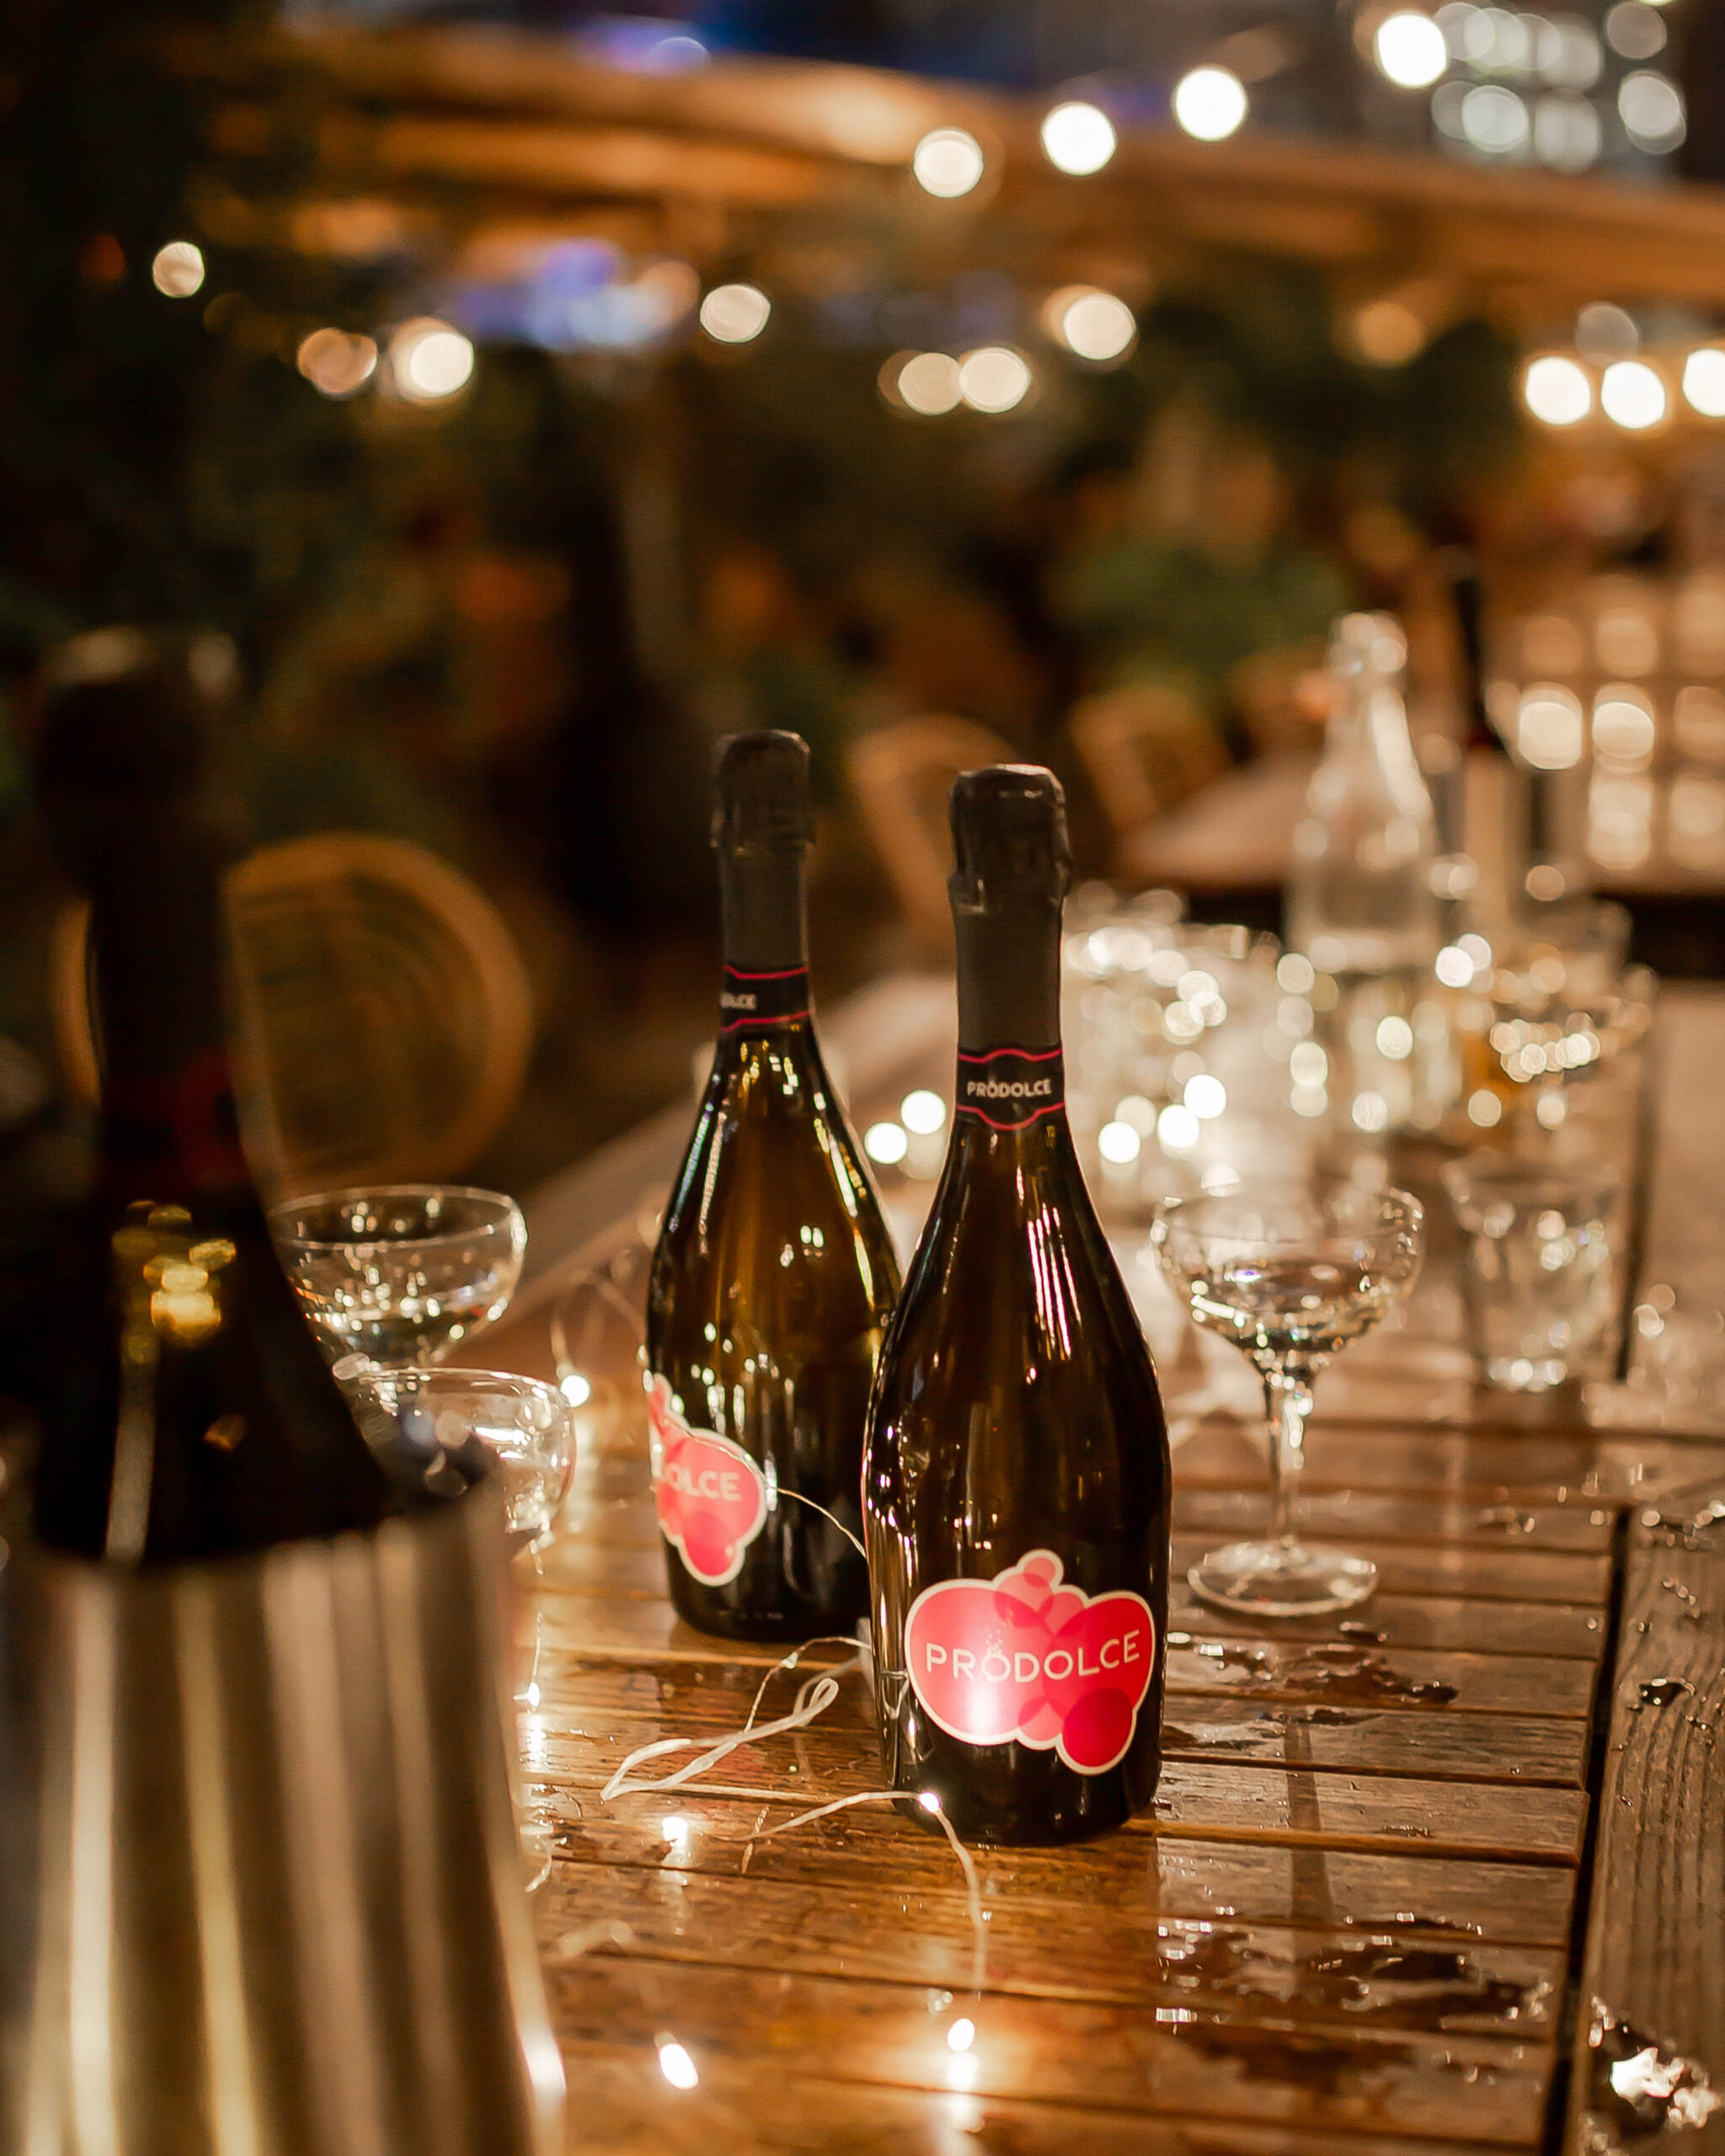 Elevate Your Festive Spirit with Prodolce’s Vegan-Friendly Sparkling Wines